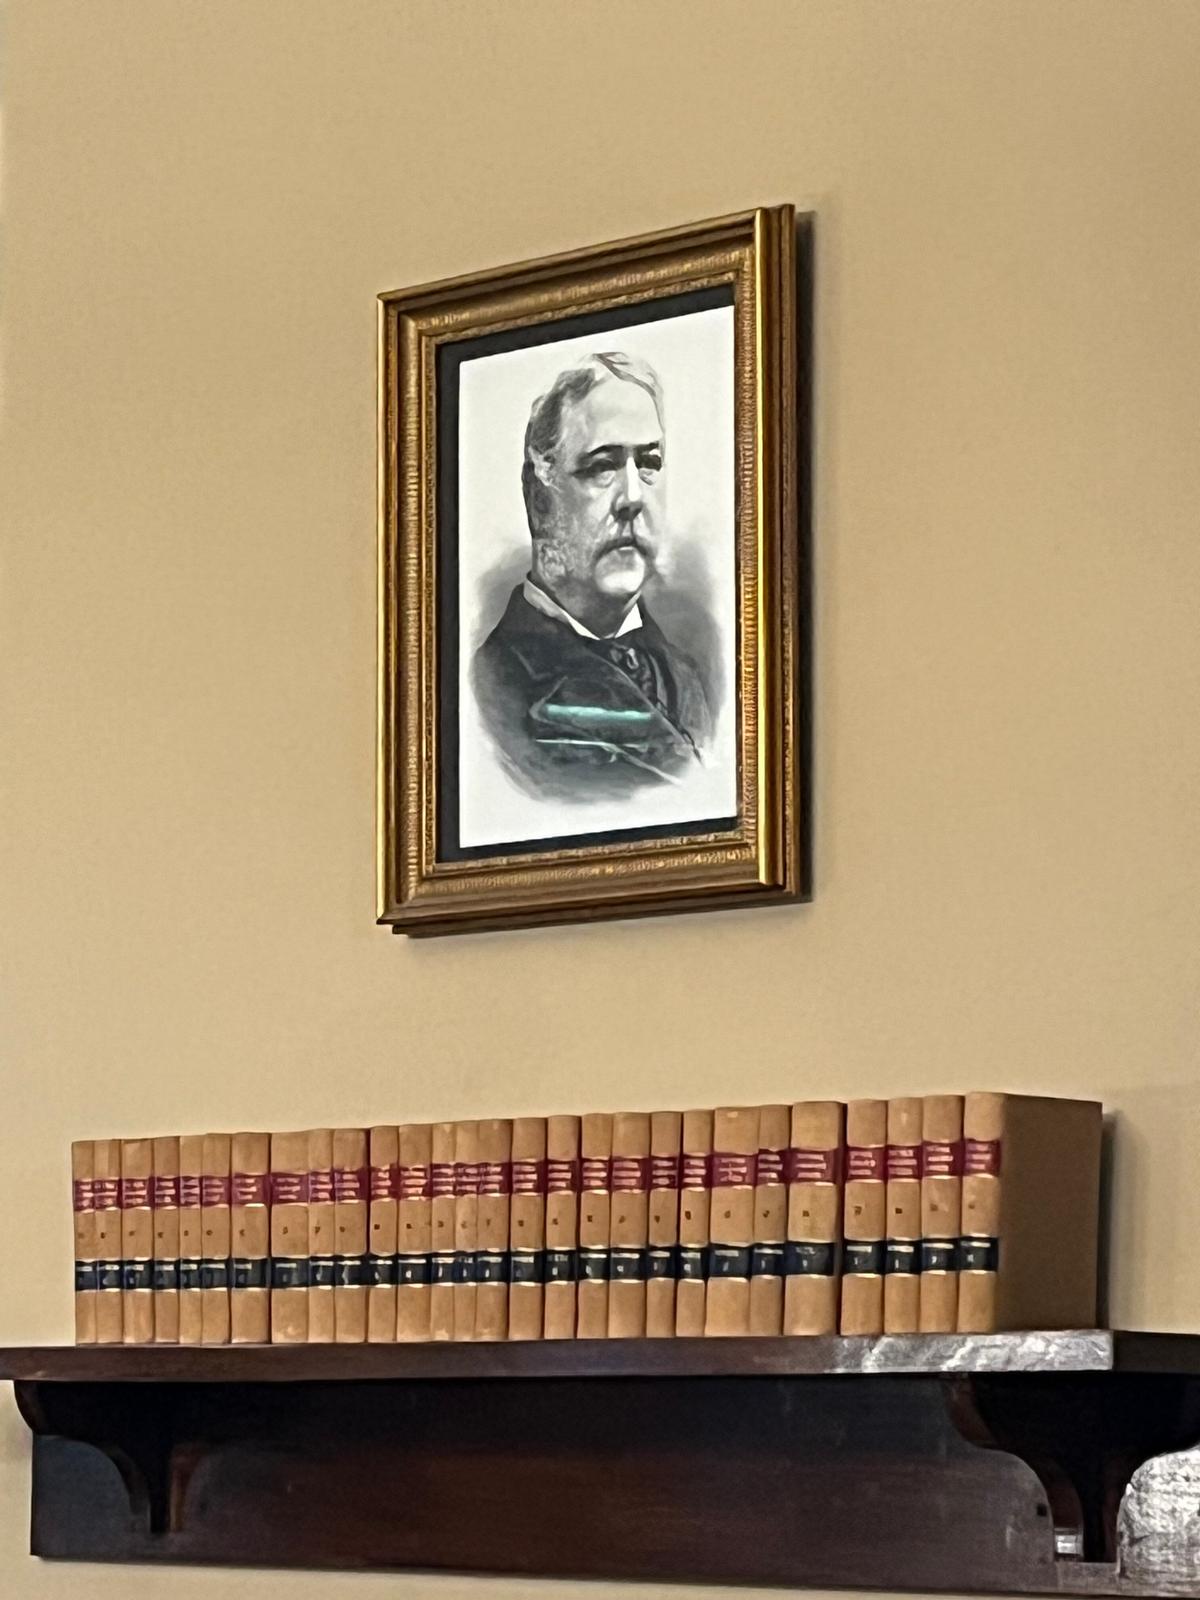 Judge Parker was an avid reader, and he had a portrait of President Chester Arthur in his office. (Fort Smith National Historic Site)